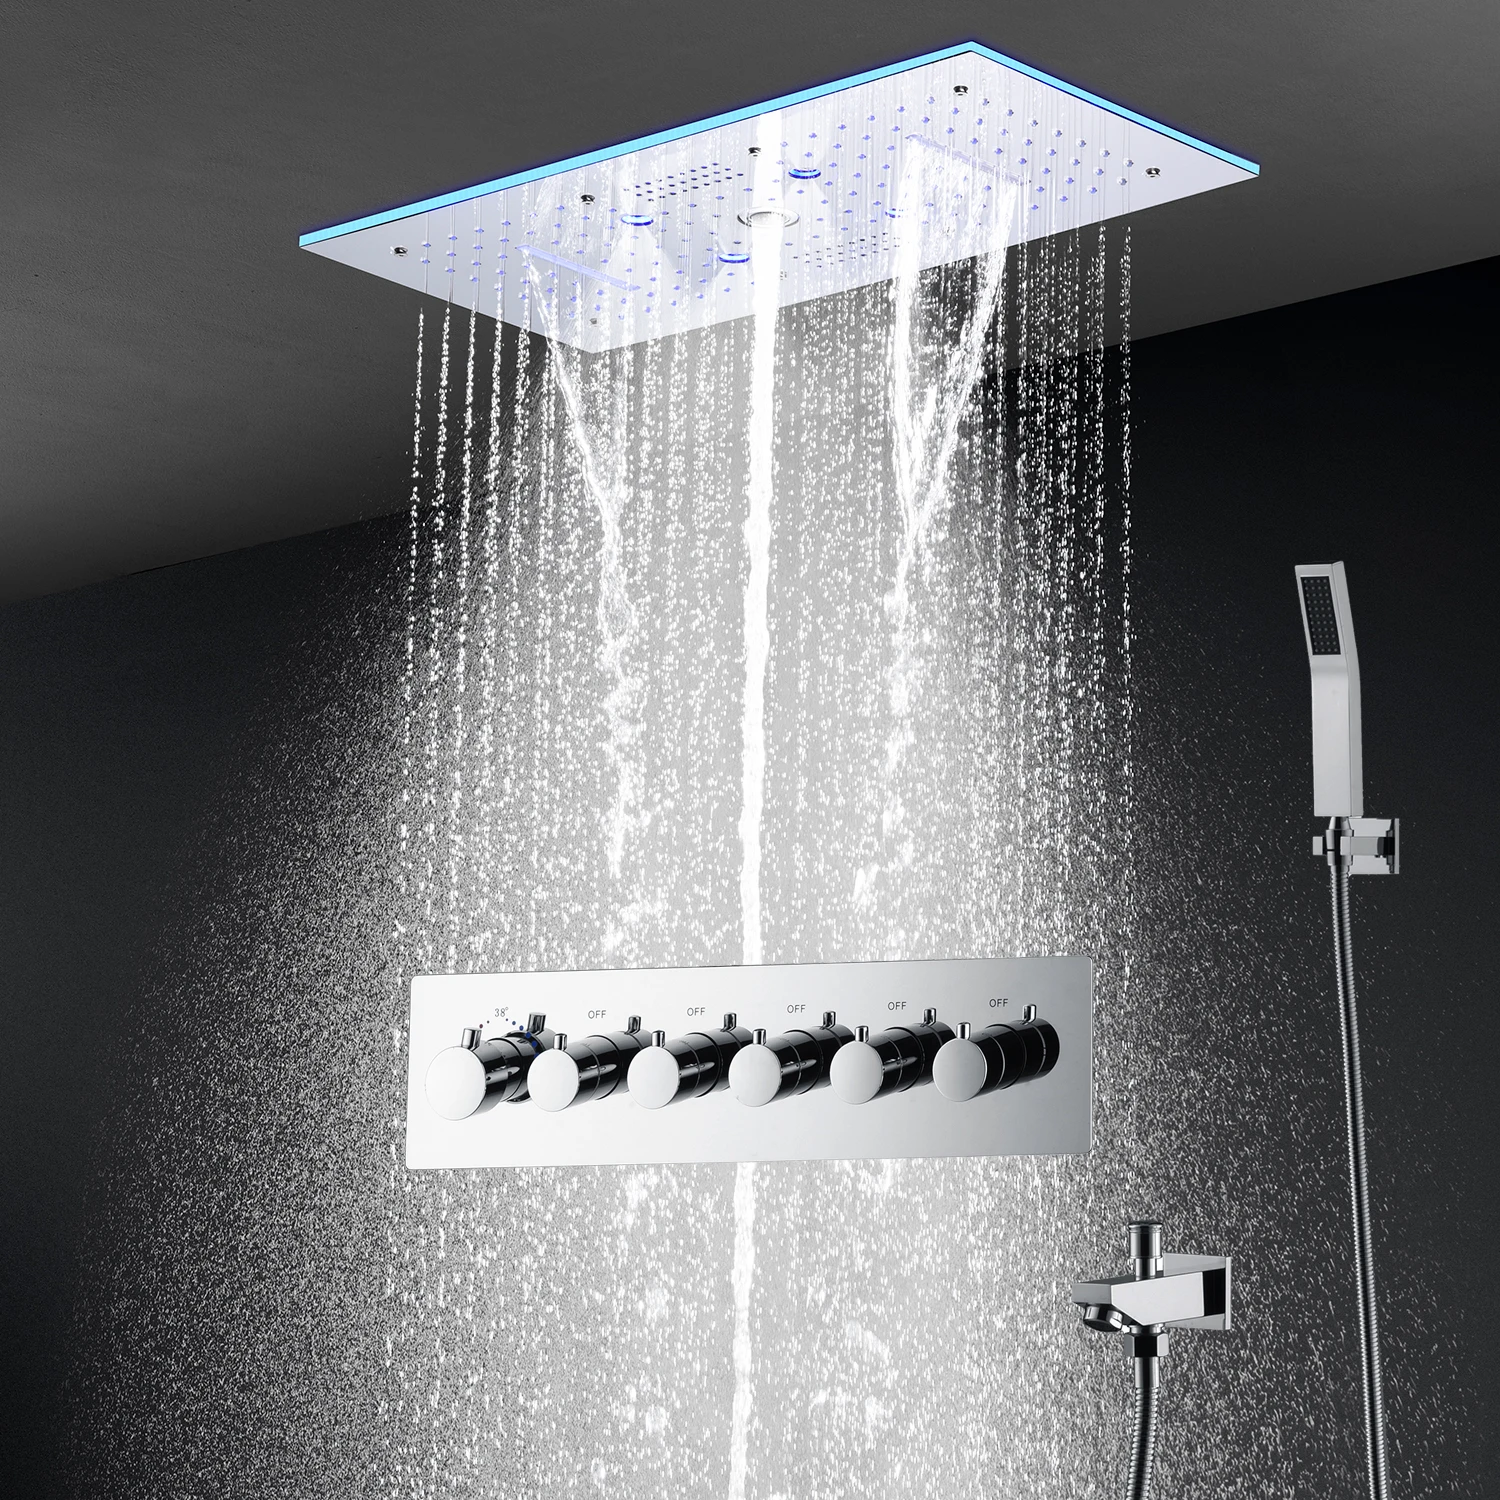 Bathroom Accessories 600x300mm 24x12Inches Bluetooth Music LED Shower Head Kit Thermostatic Mixer Valve